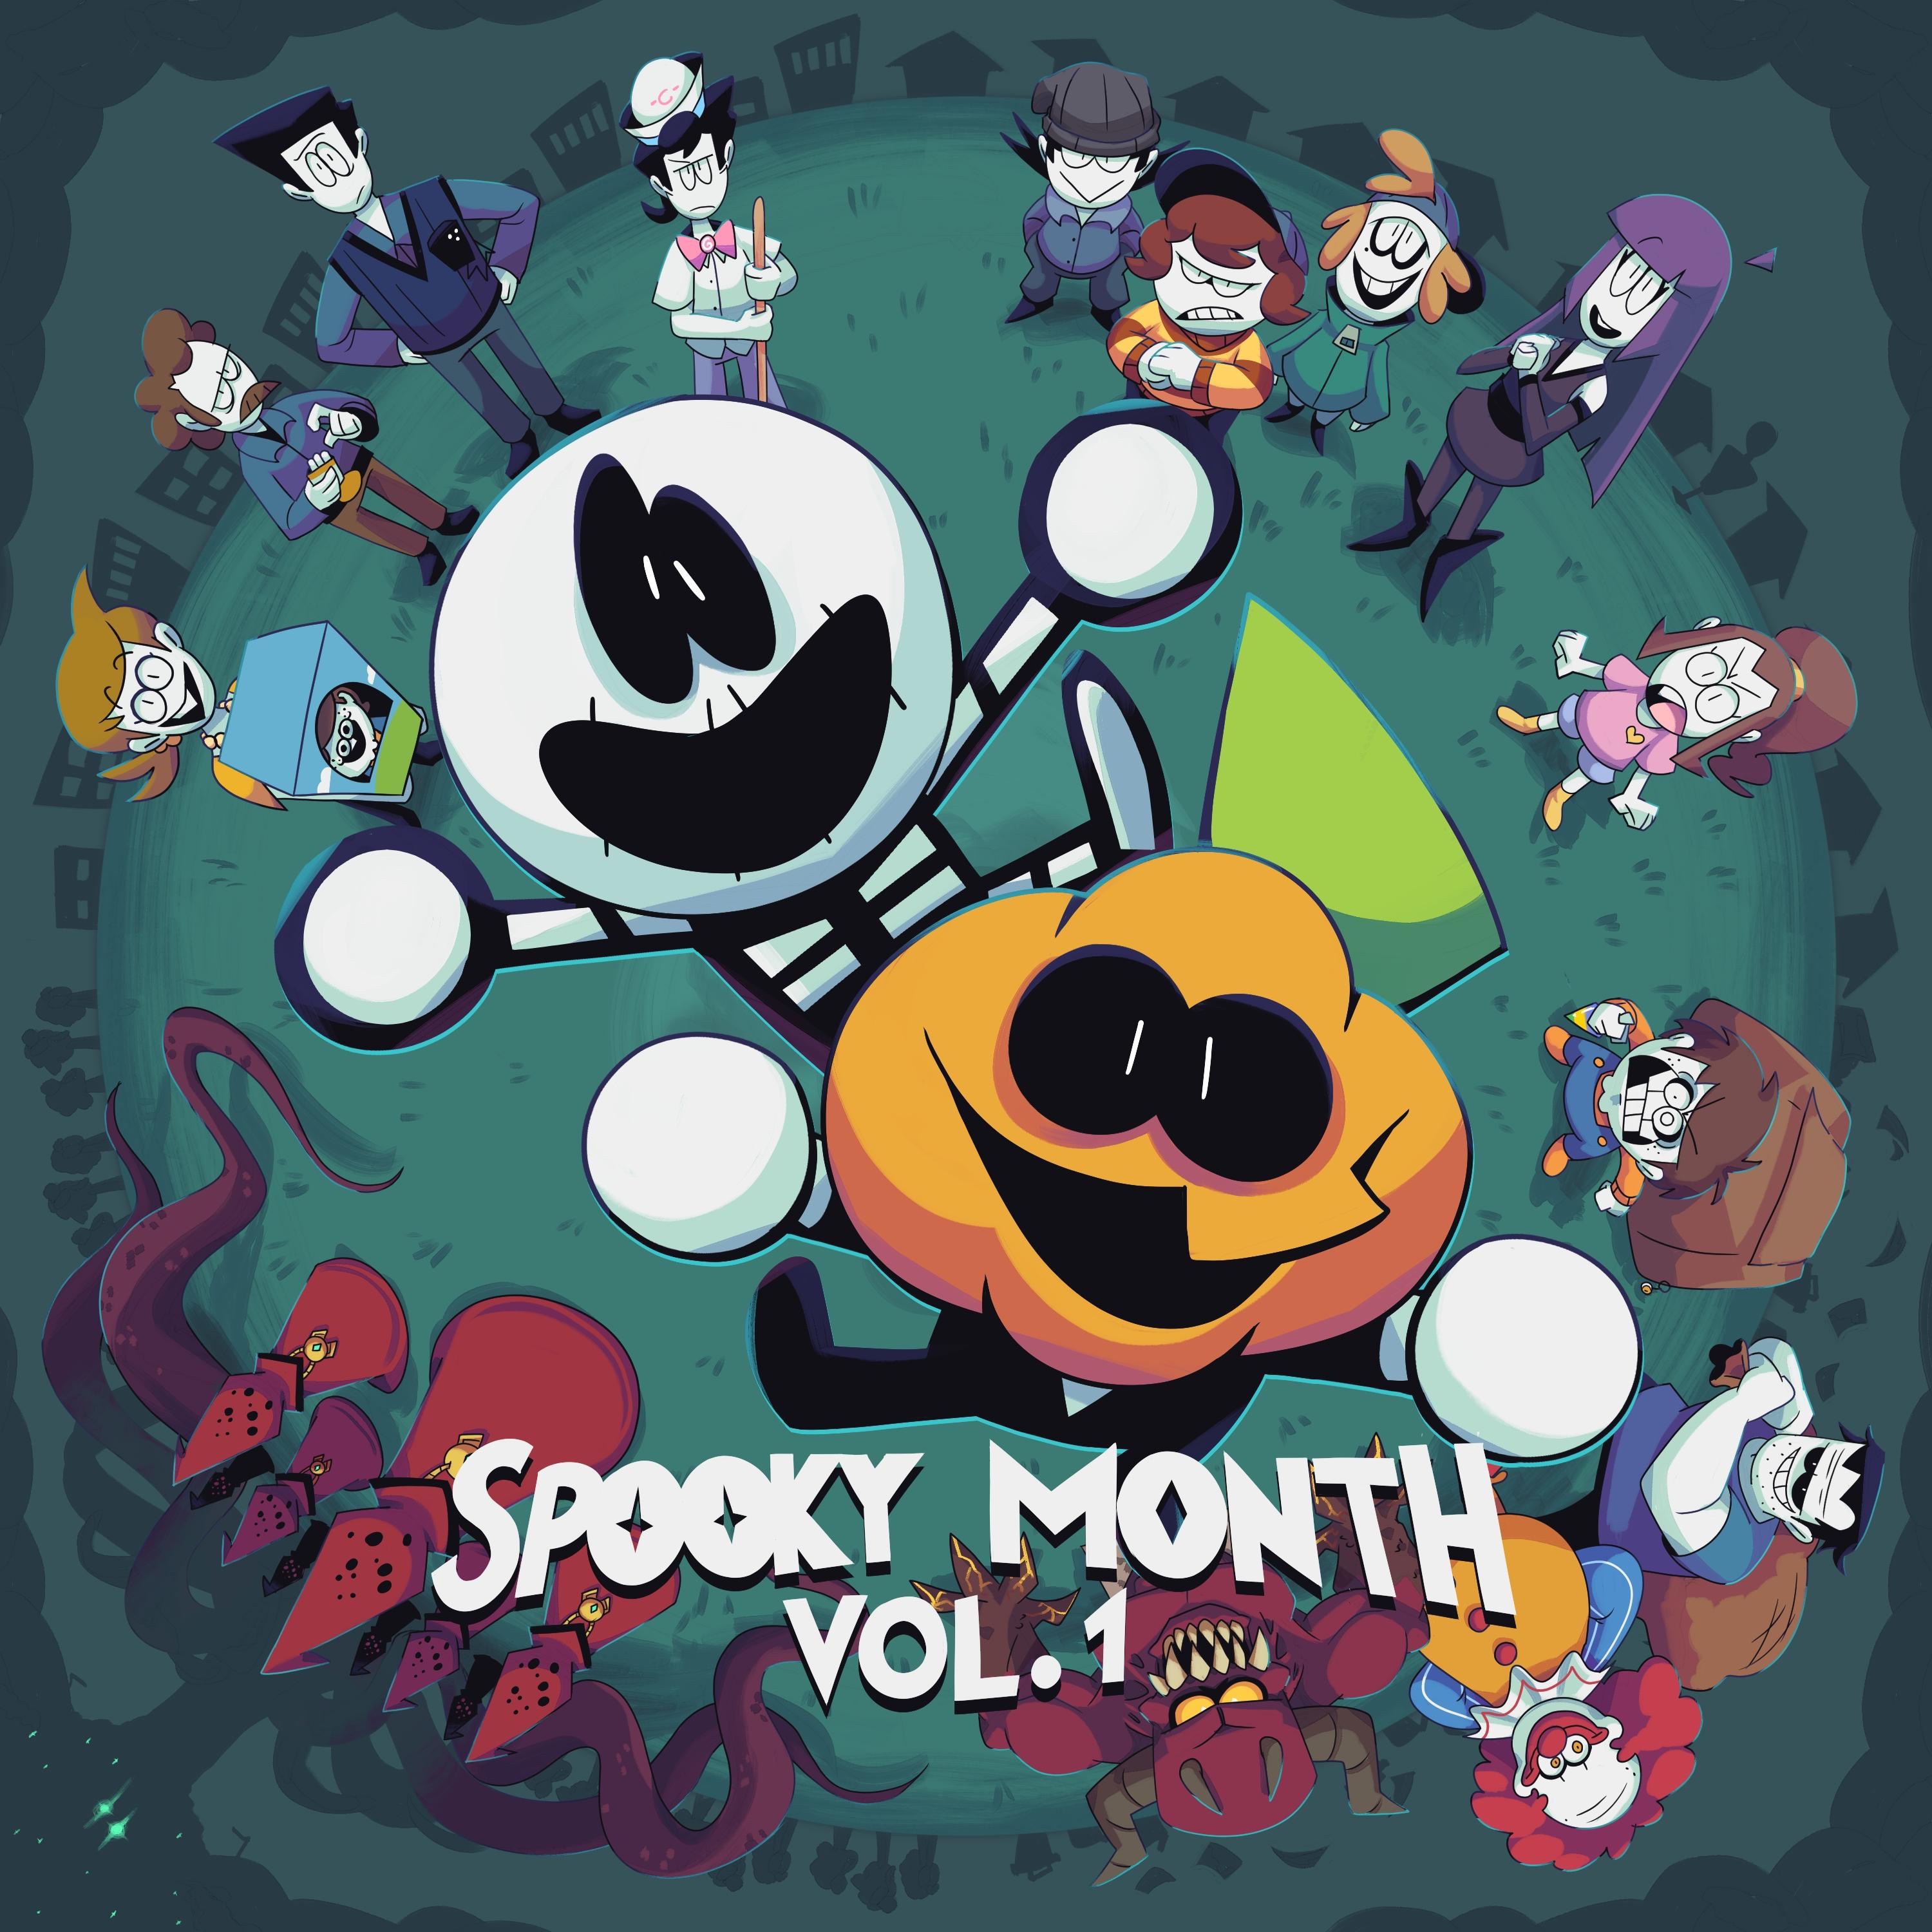 Spooky month eyes of the universe